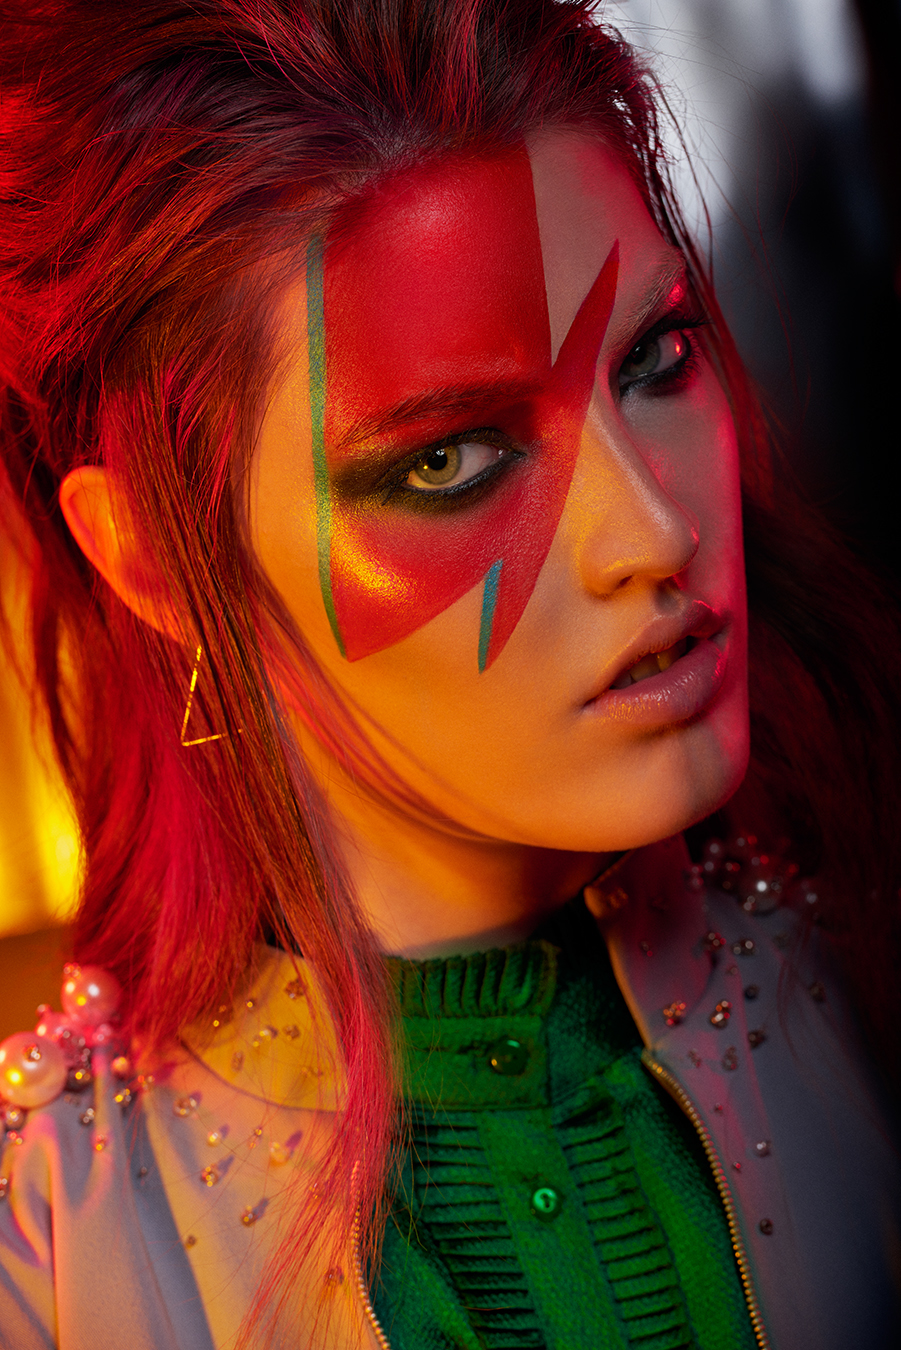 Fashion  editorial david bowie artist Clothing green red textures gels lights